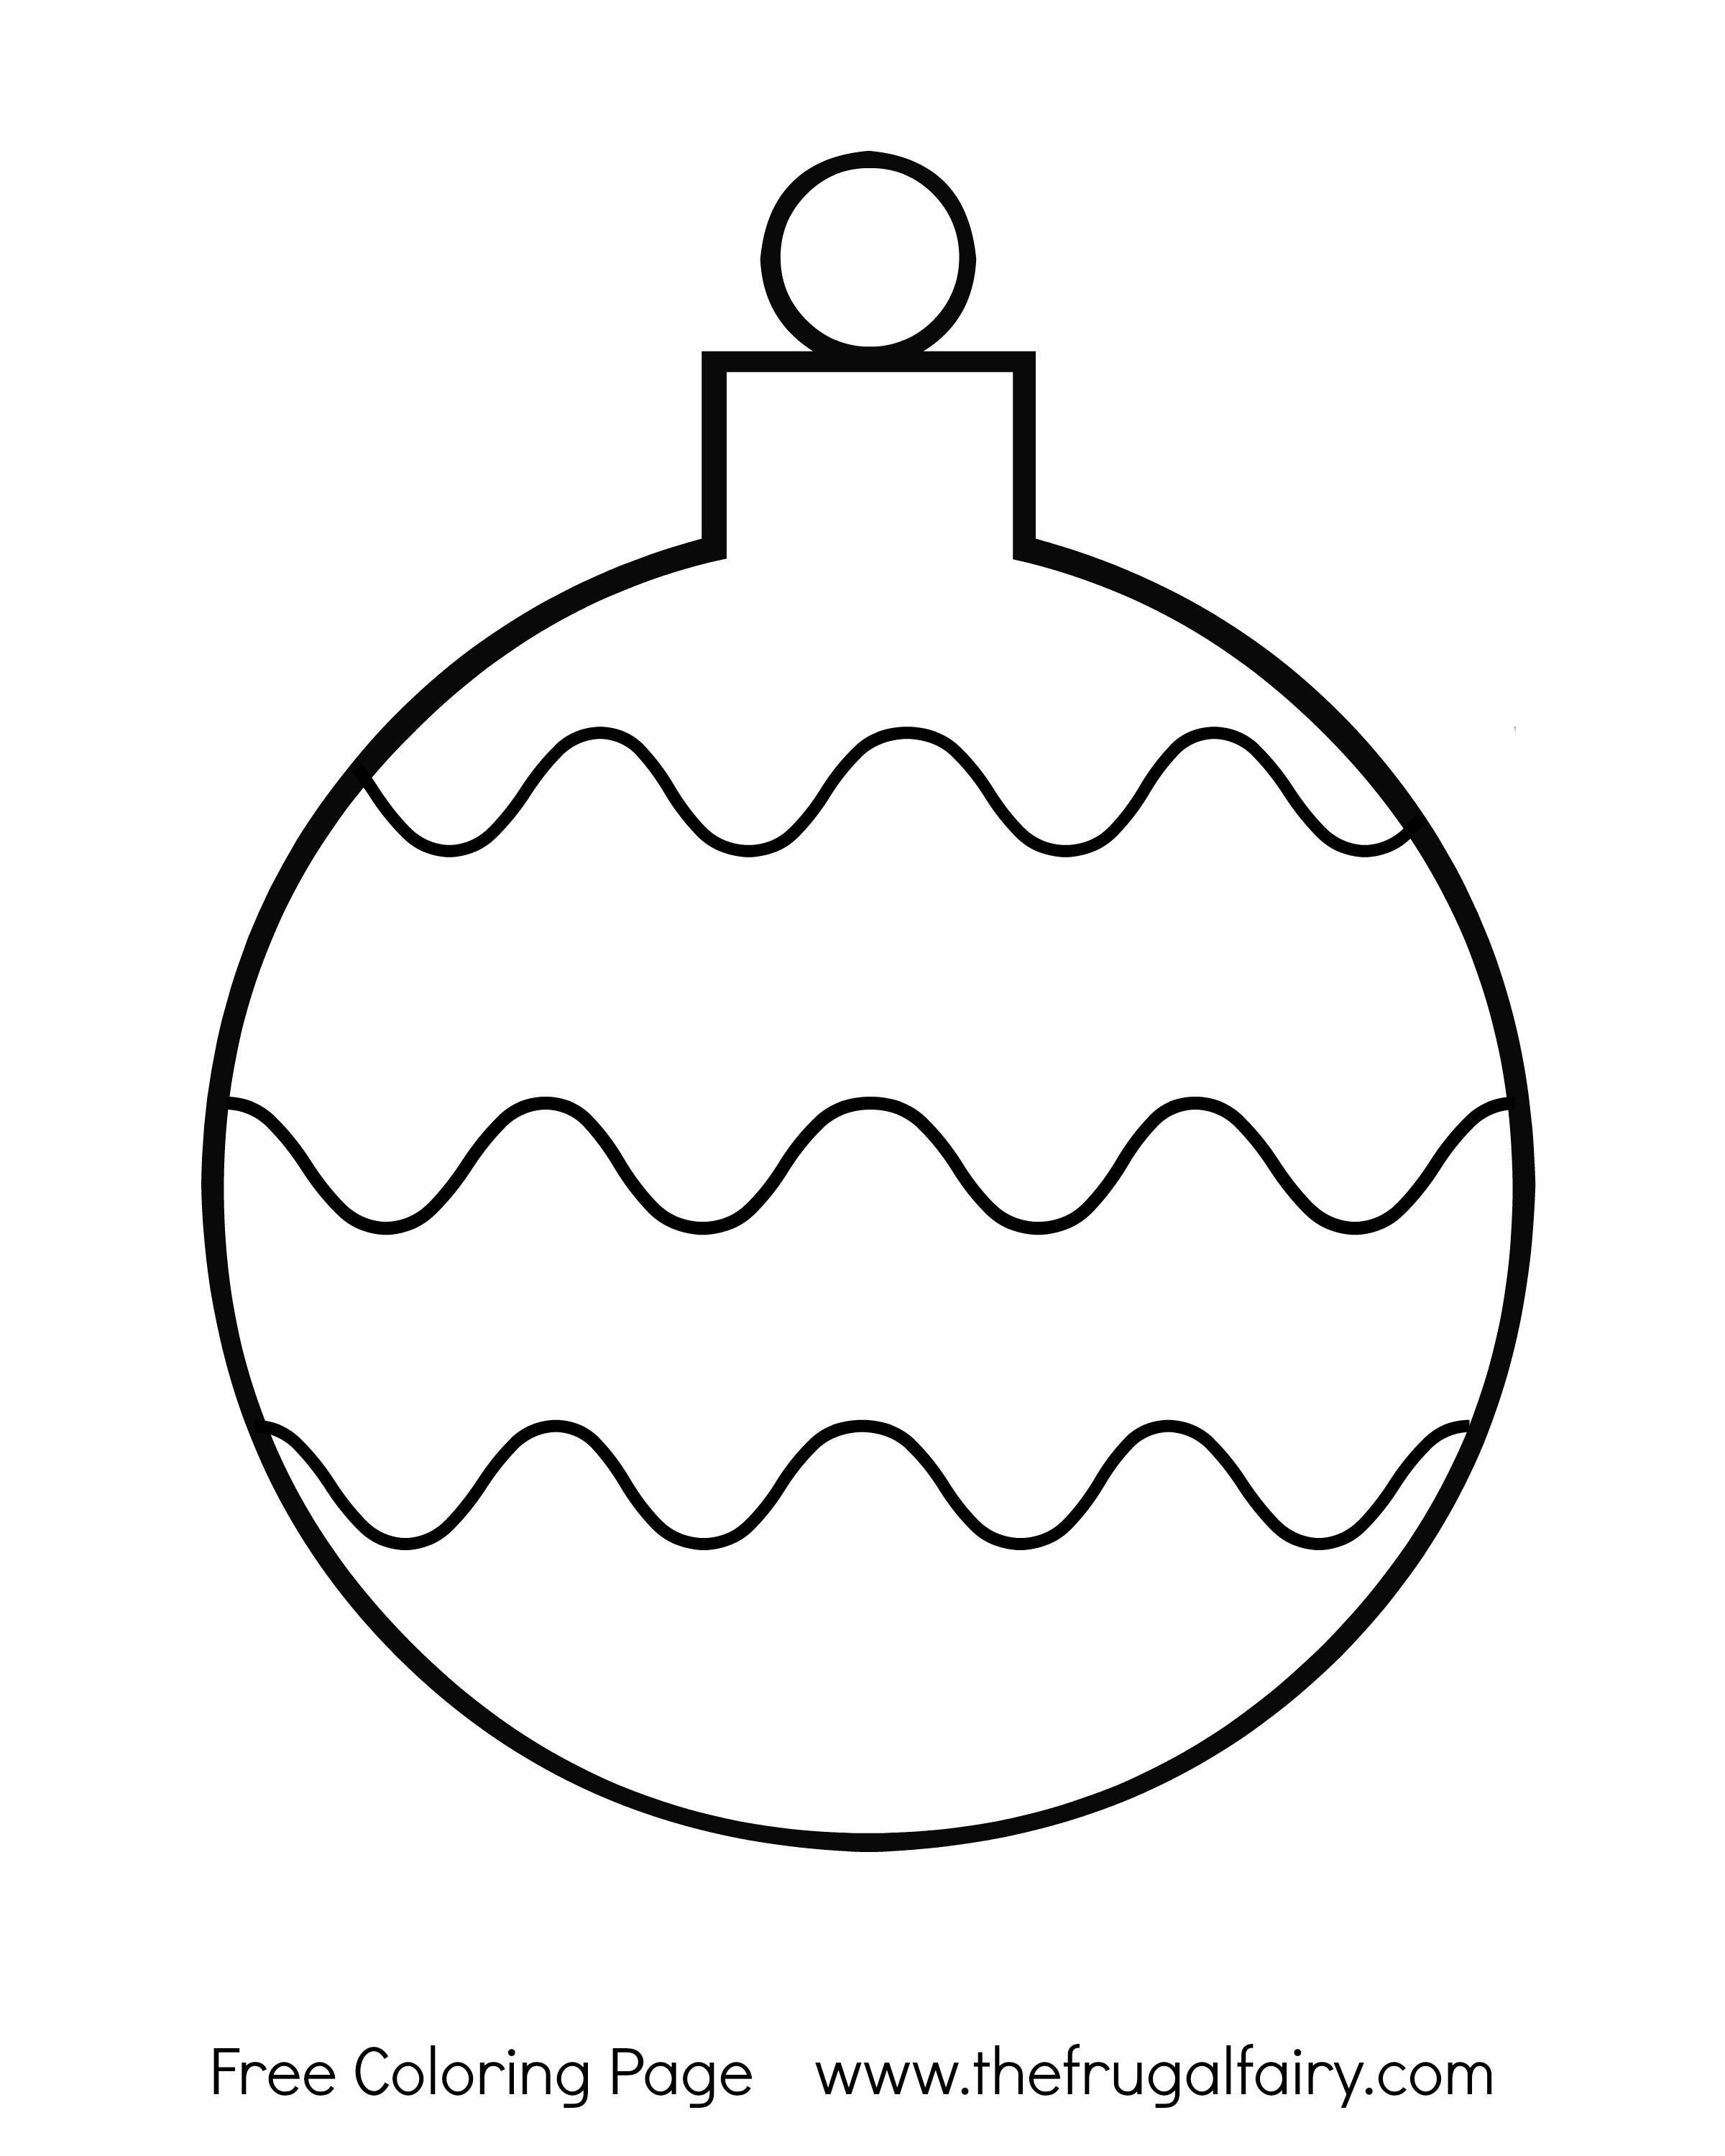 Printable Ornament Coloring Pages at GetColorings.com | Free printable ...